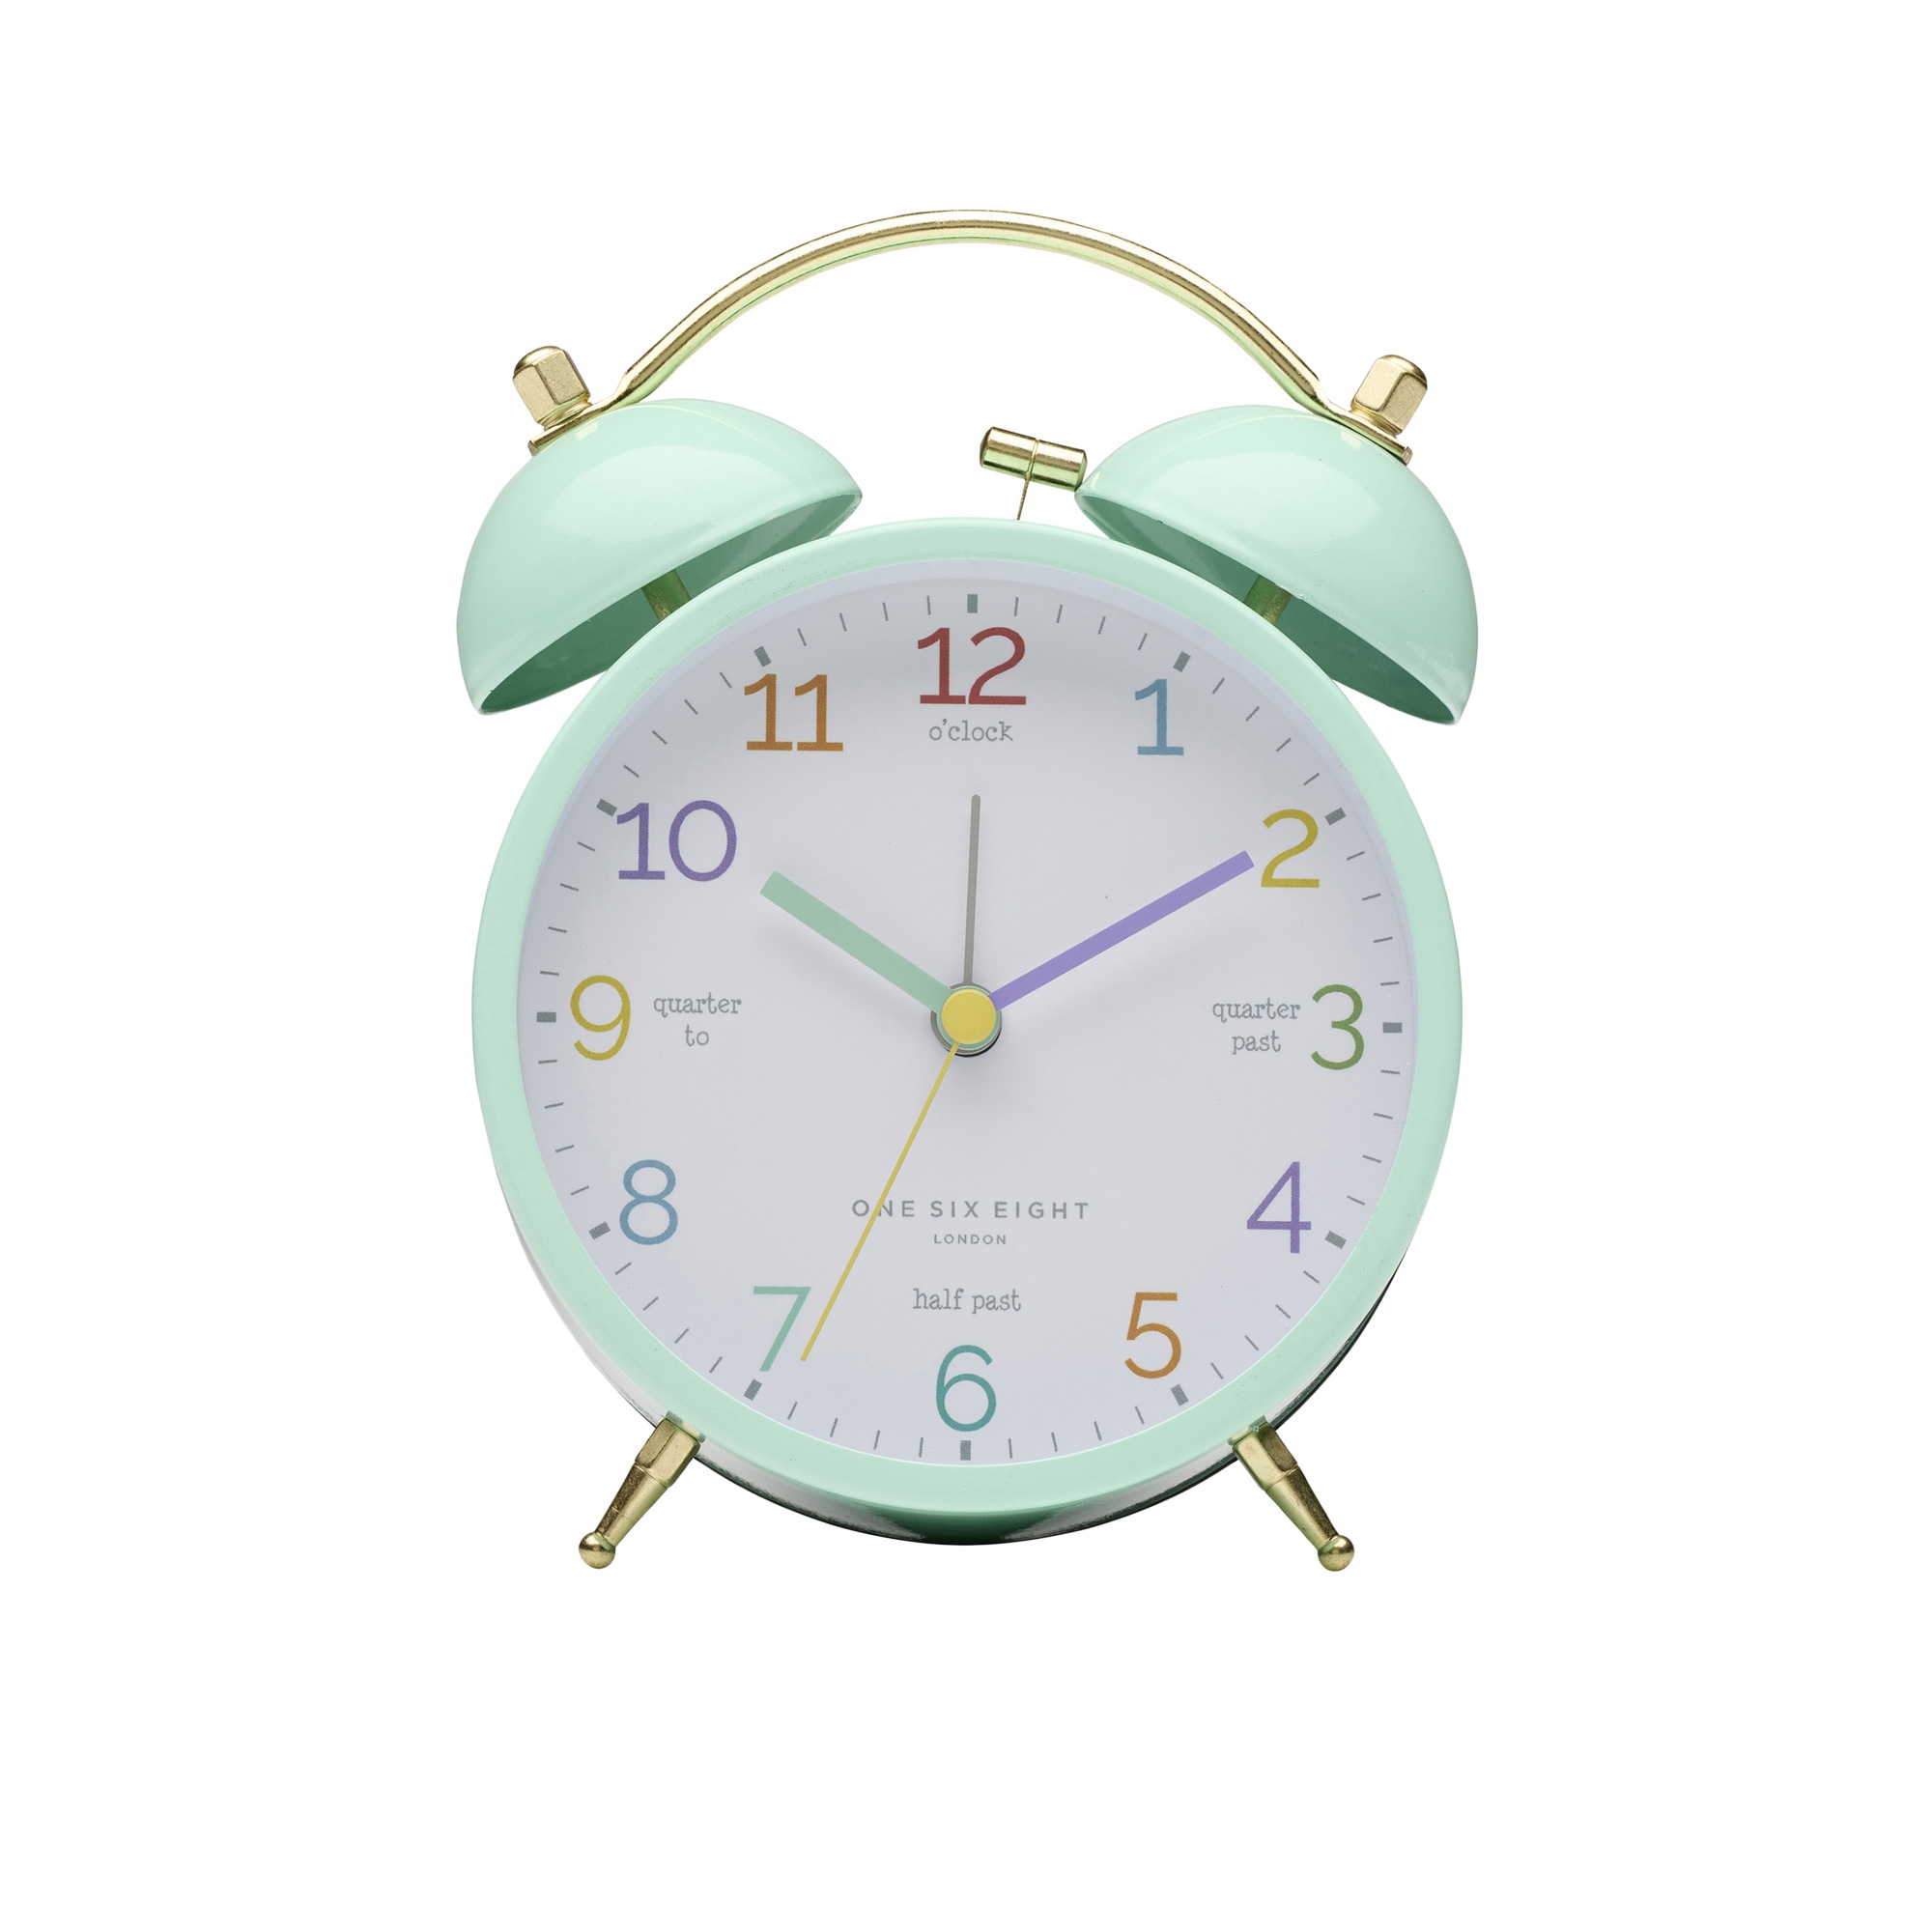 One Six Eight London Learn The Time Alarm Clock Green Image 1